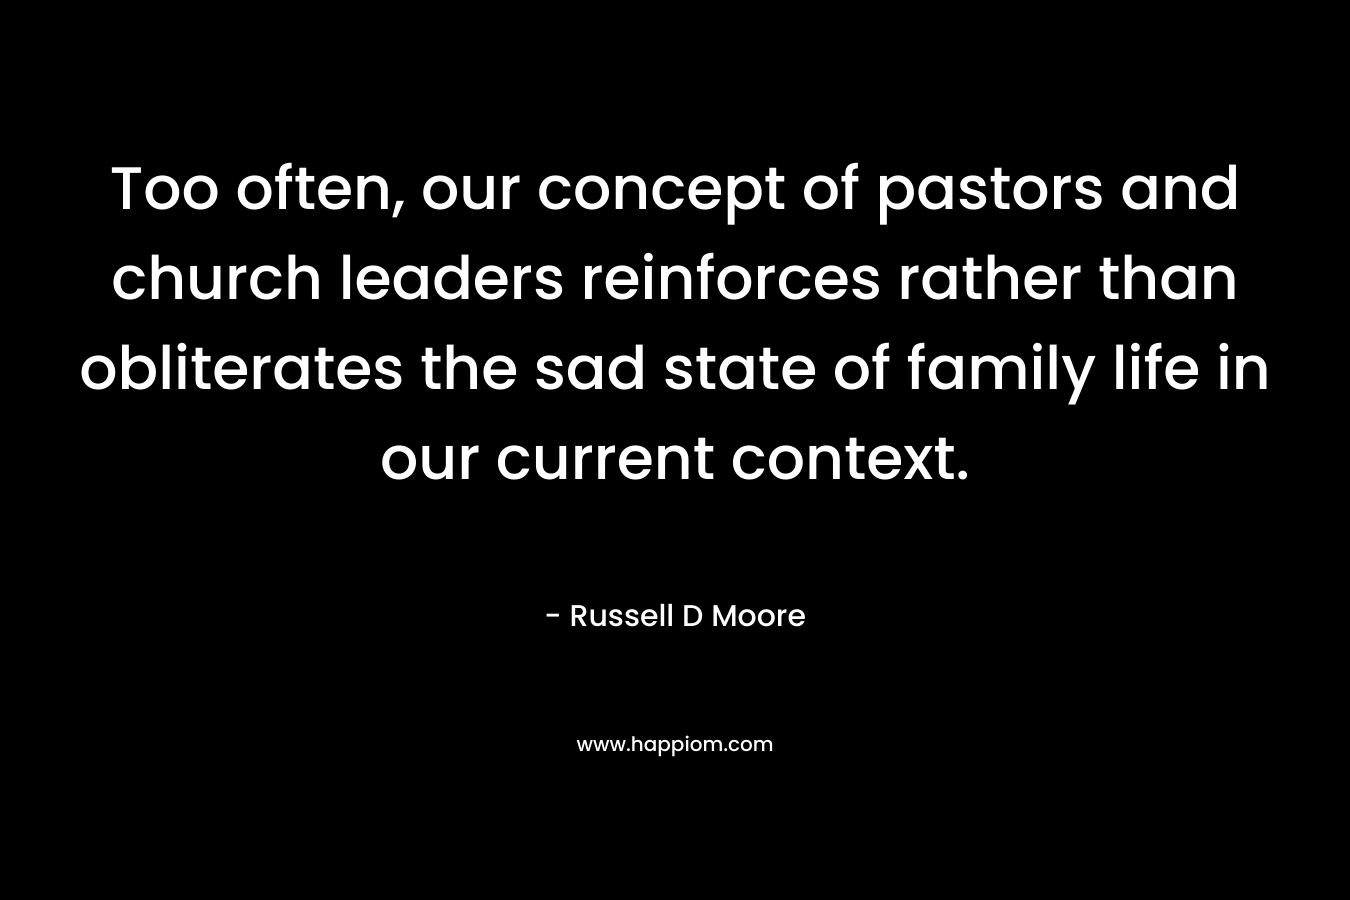 Too often, our concept of pastors and church leaders reinforces rather than obliterates the sad state of family life in our current context. – Russell D Moore